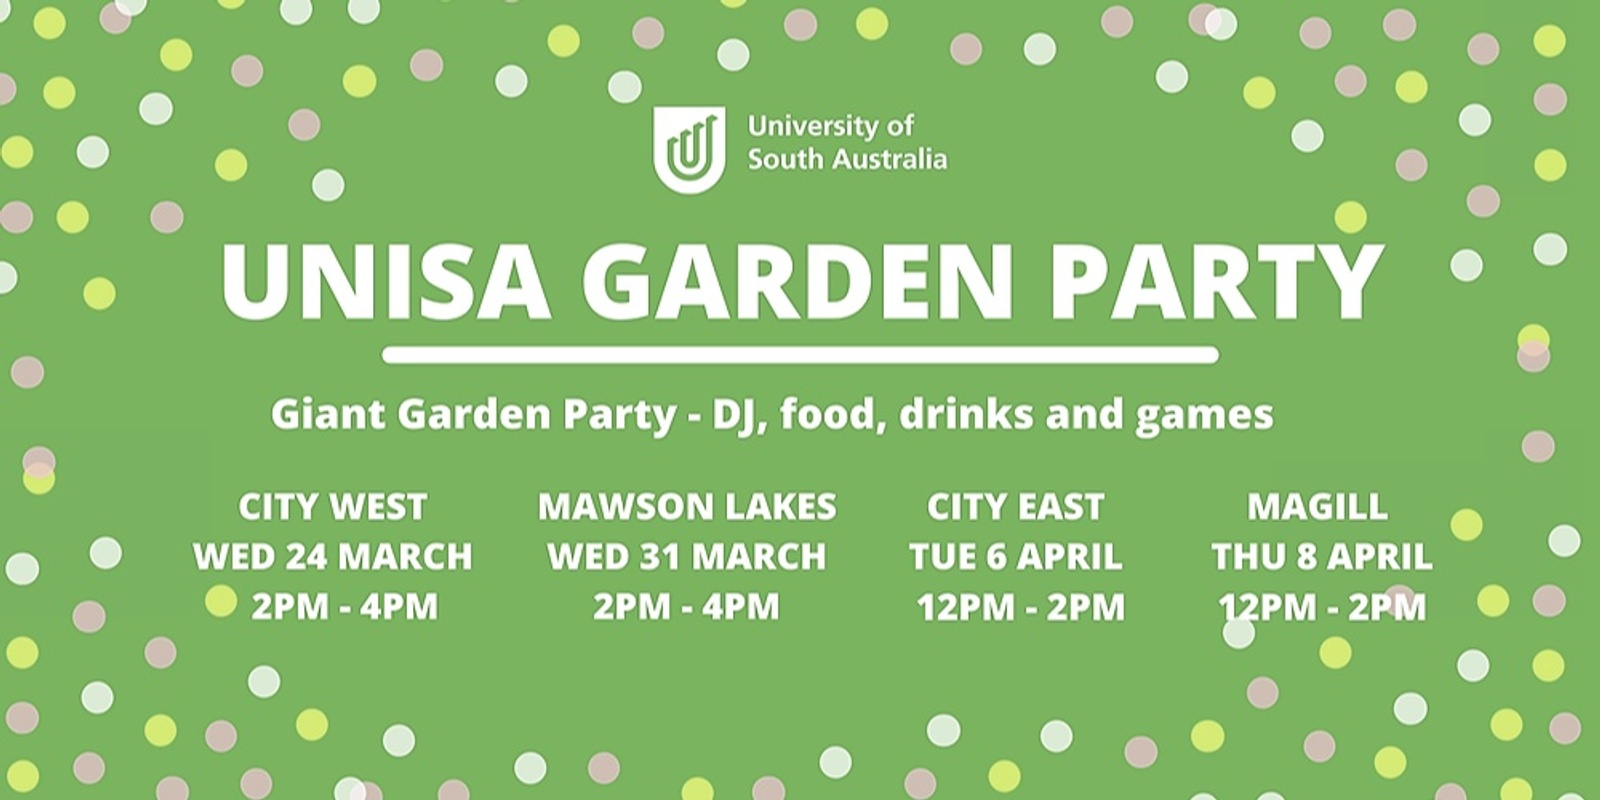 Banner image for UniSA Garden Party - City East campus